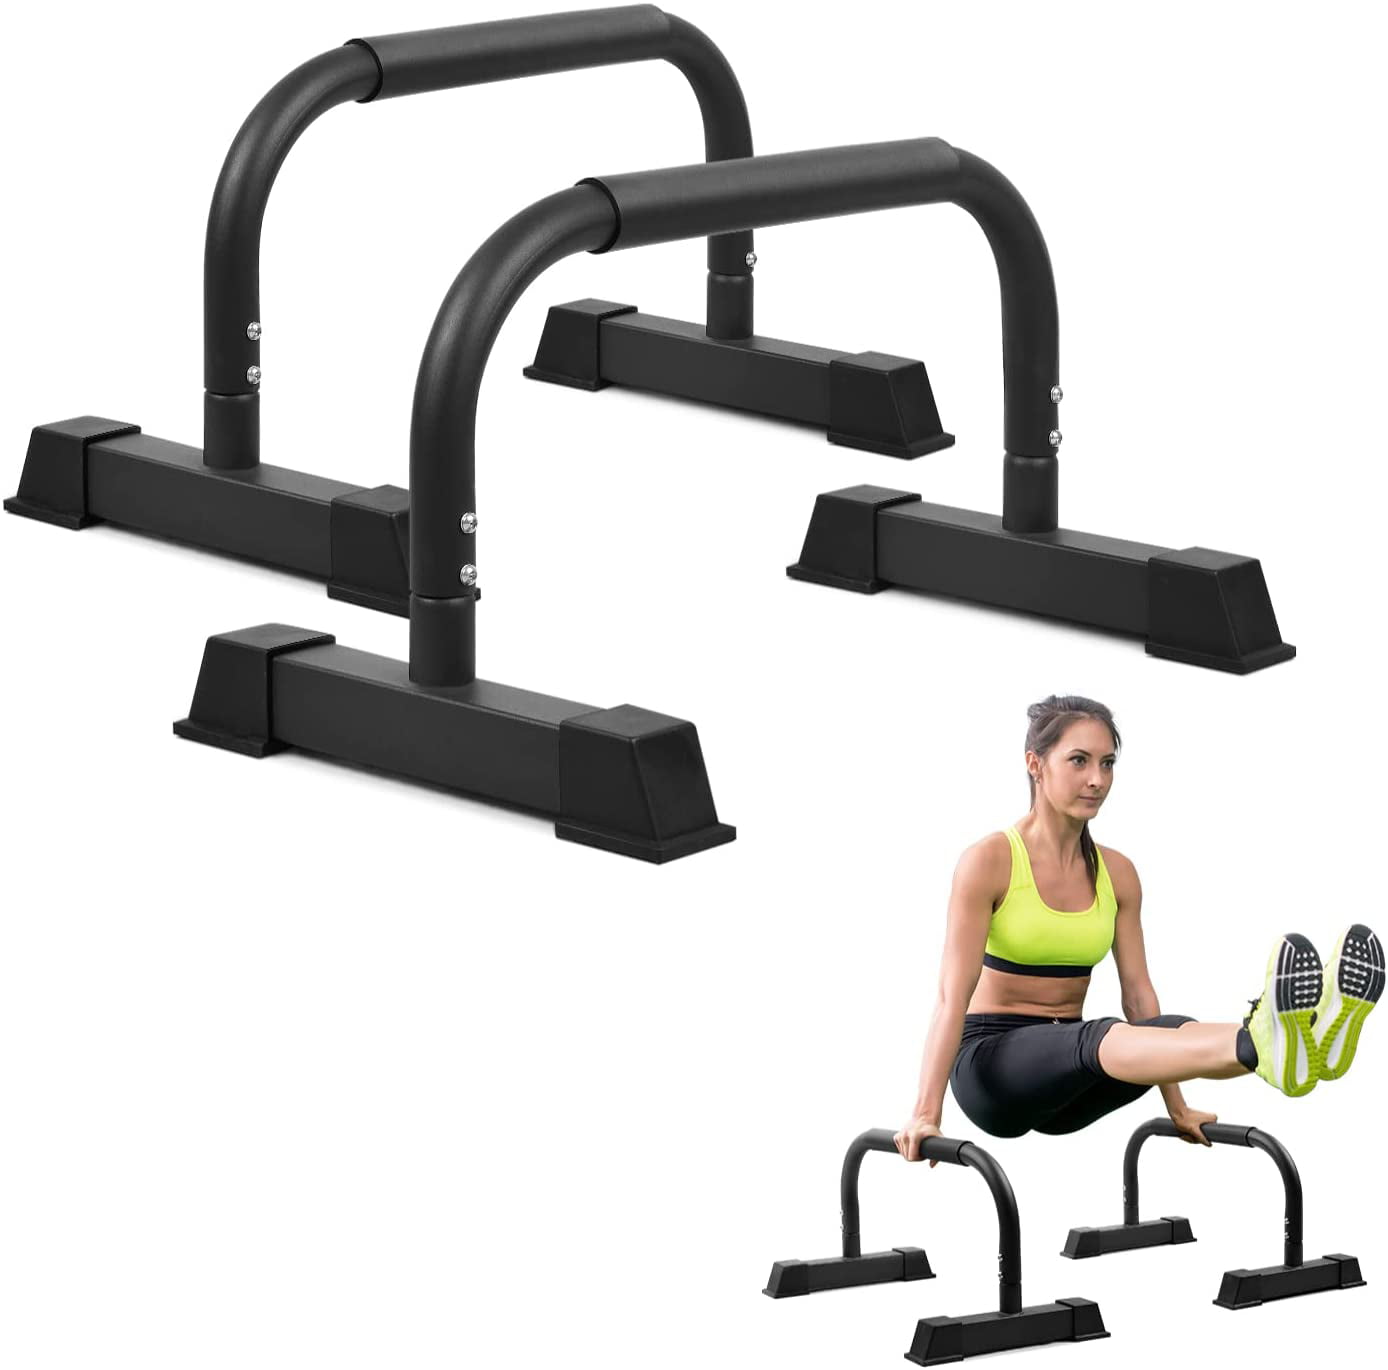 Details about   Push-Up Bars Push Up Stands Bracket Set Arm Chest Muscles Trainer Indoor Fitness 